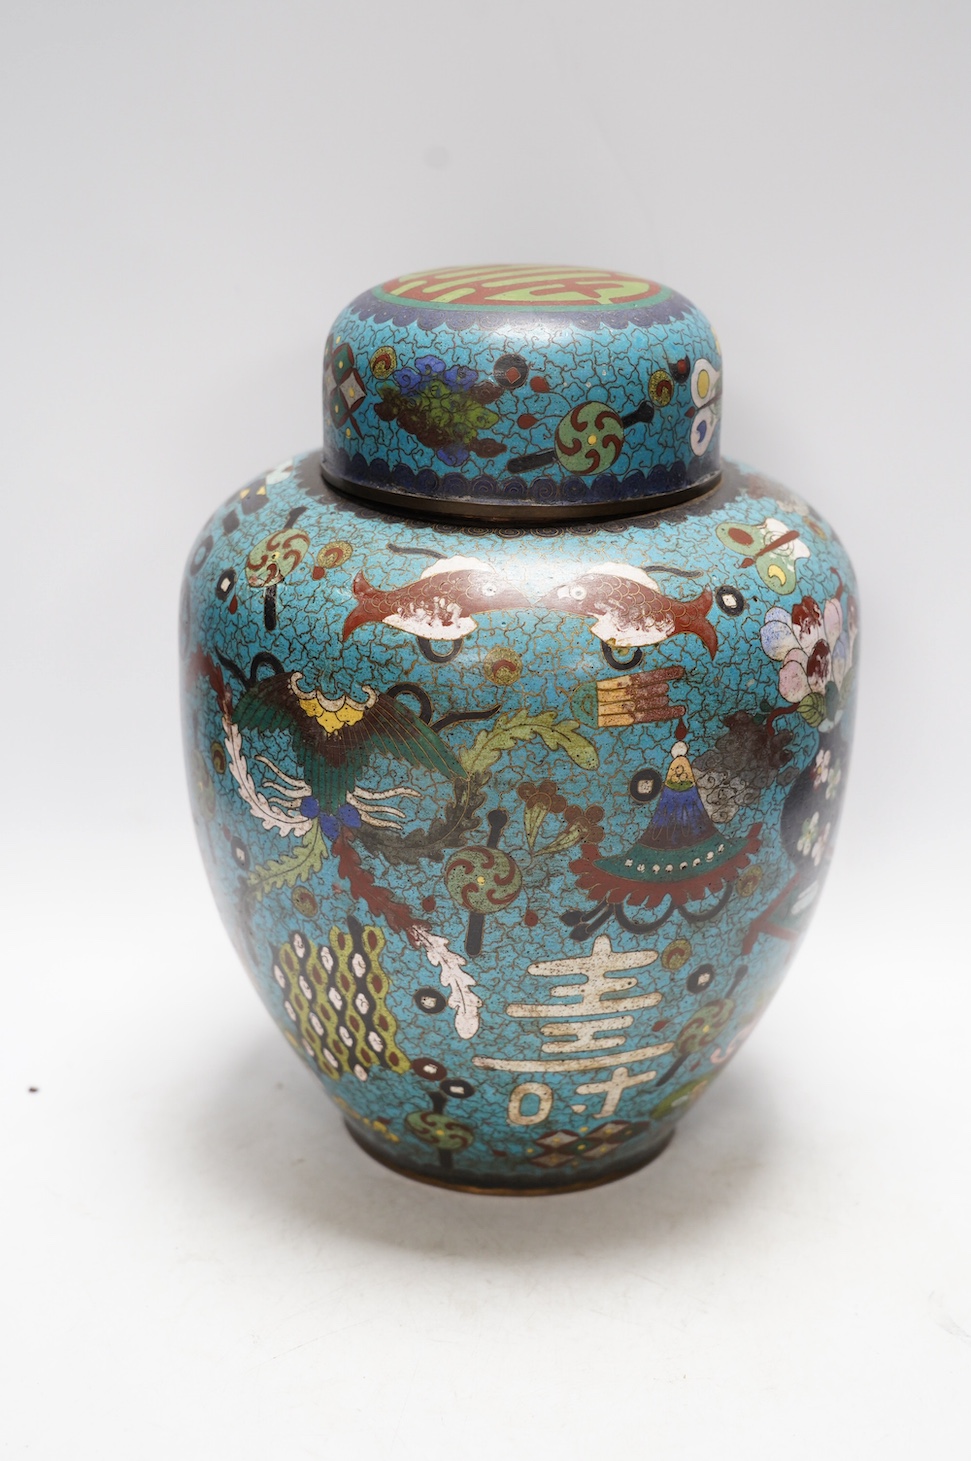 A Chinese cloisonné enamel jar and cover, early 20th century, 30cm high. Condition - poor